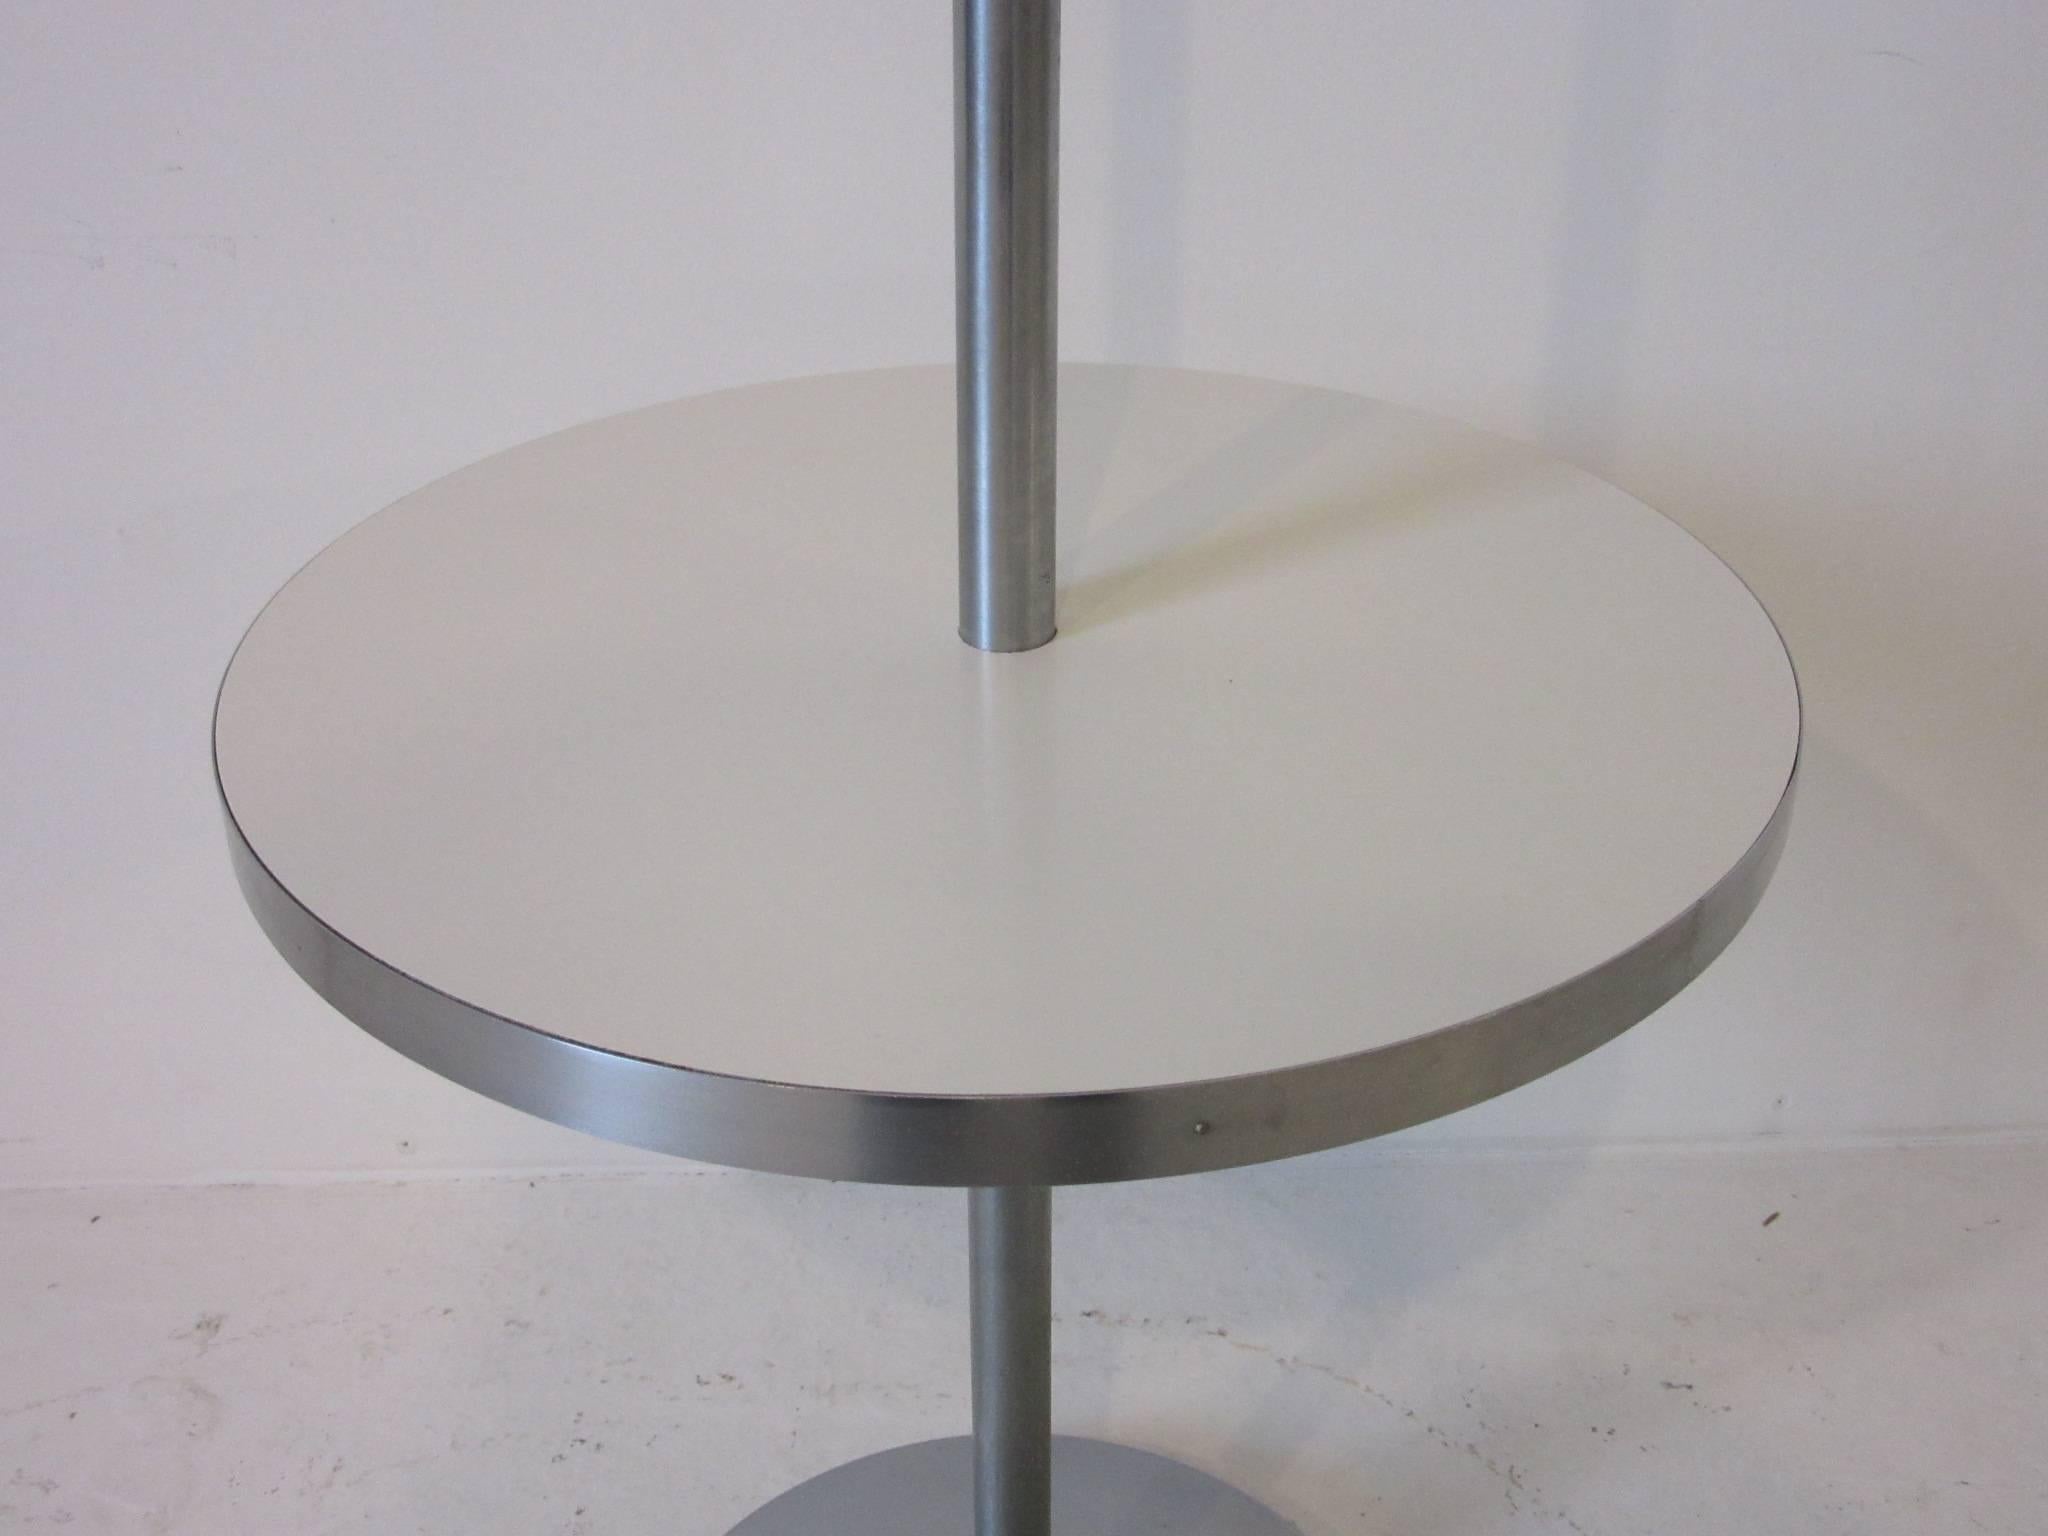 A brushed stainless steel pole floor lamp with integrated laminate drink table with metal base and original linen shade. Manufactured by the Nessen Lamp Company. The drink table measurement is 14